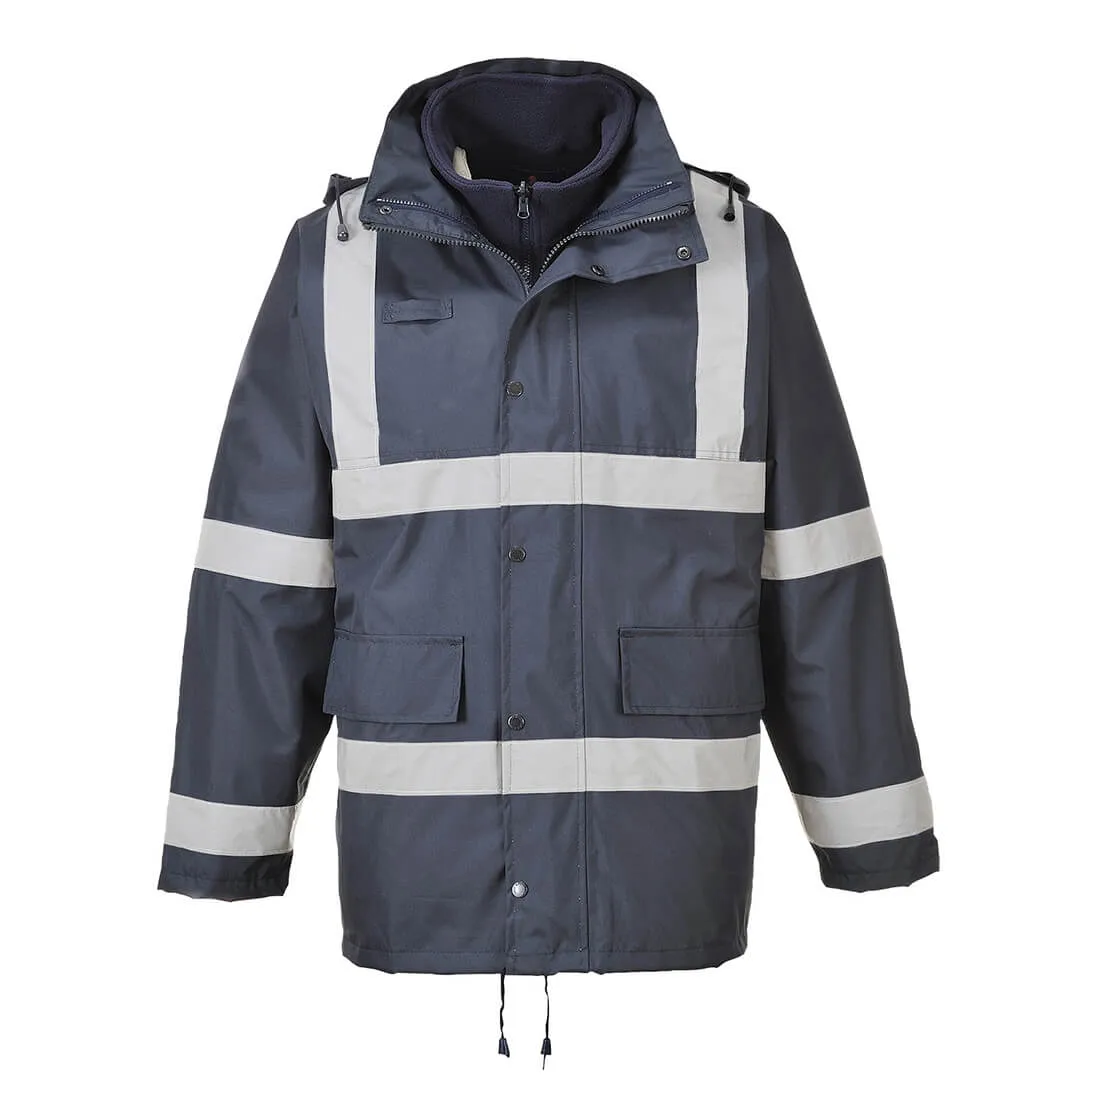 Portwest S431 Iona 3in1 Traffic Jacket - Navy, 3XL